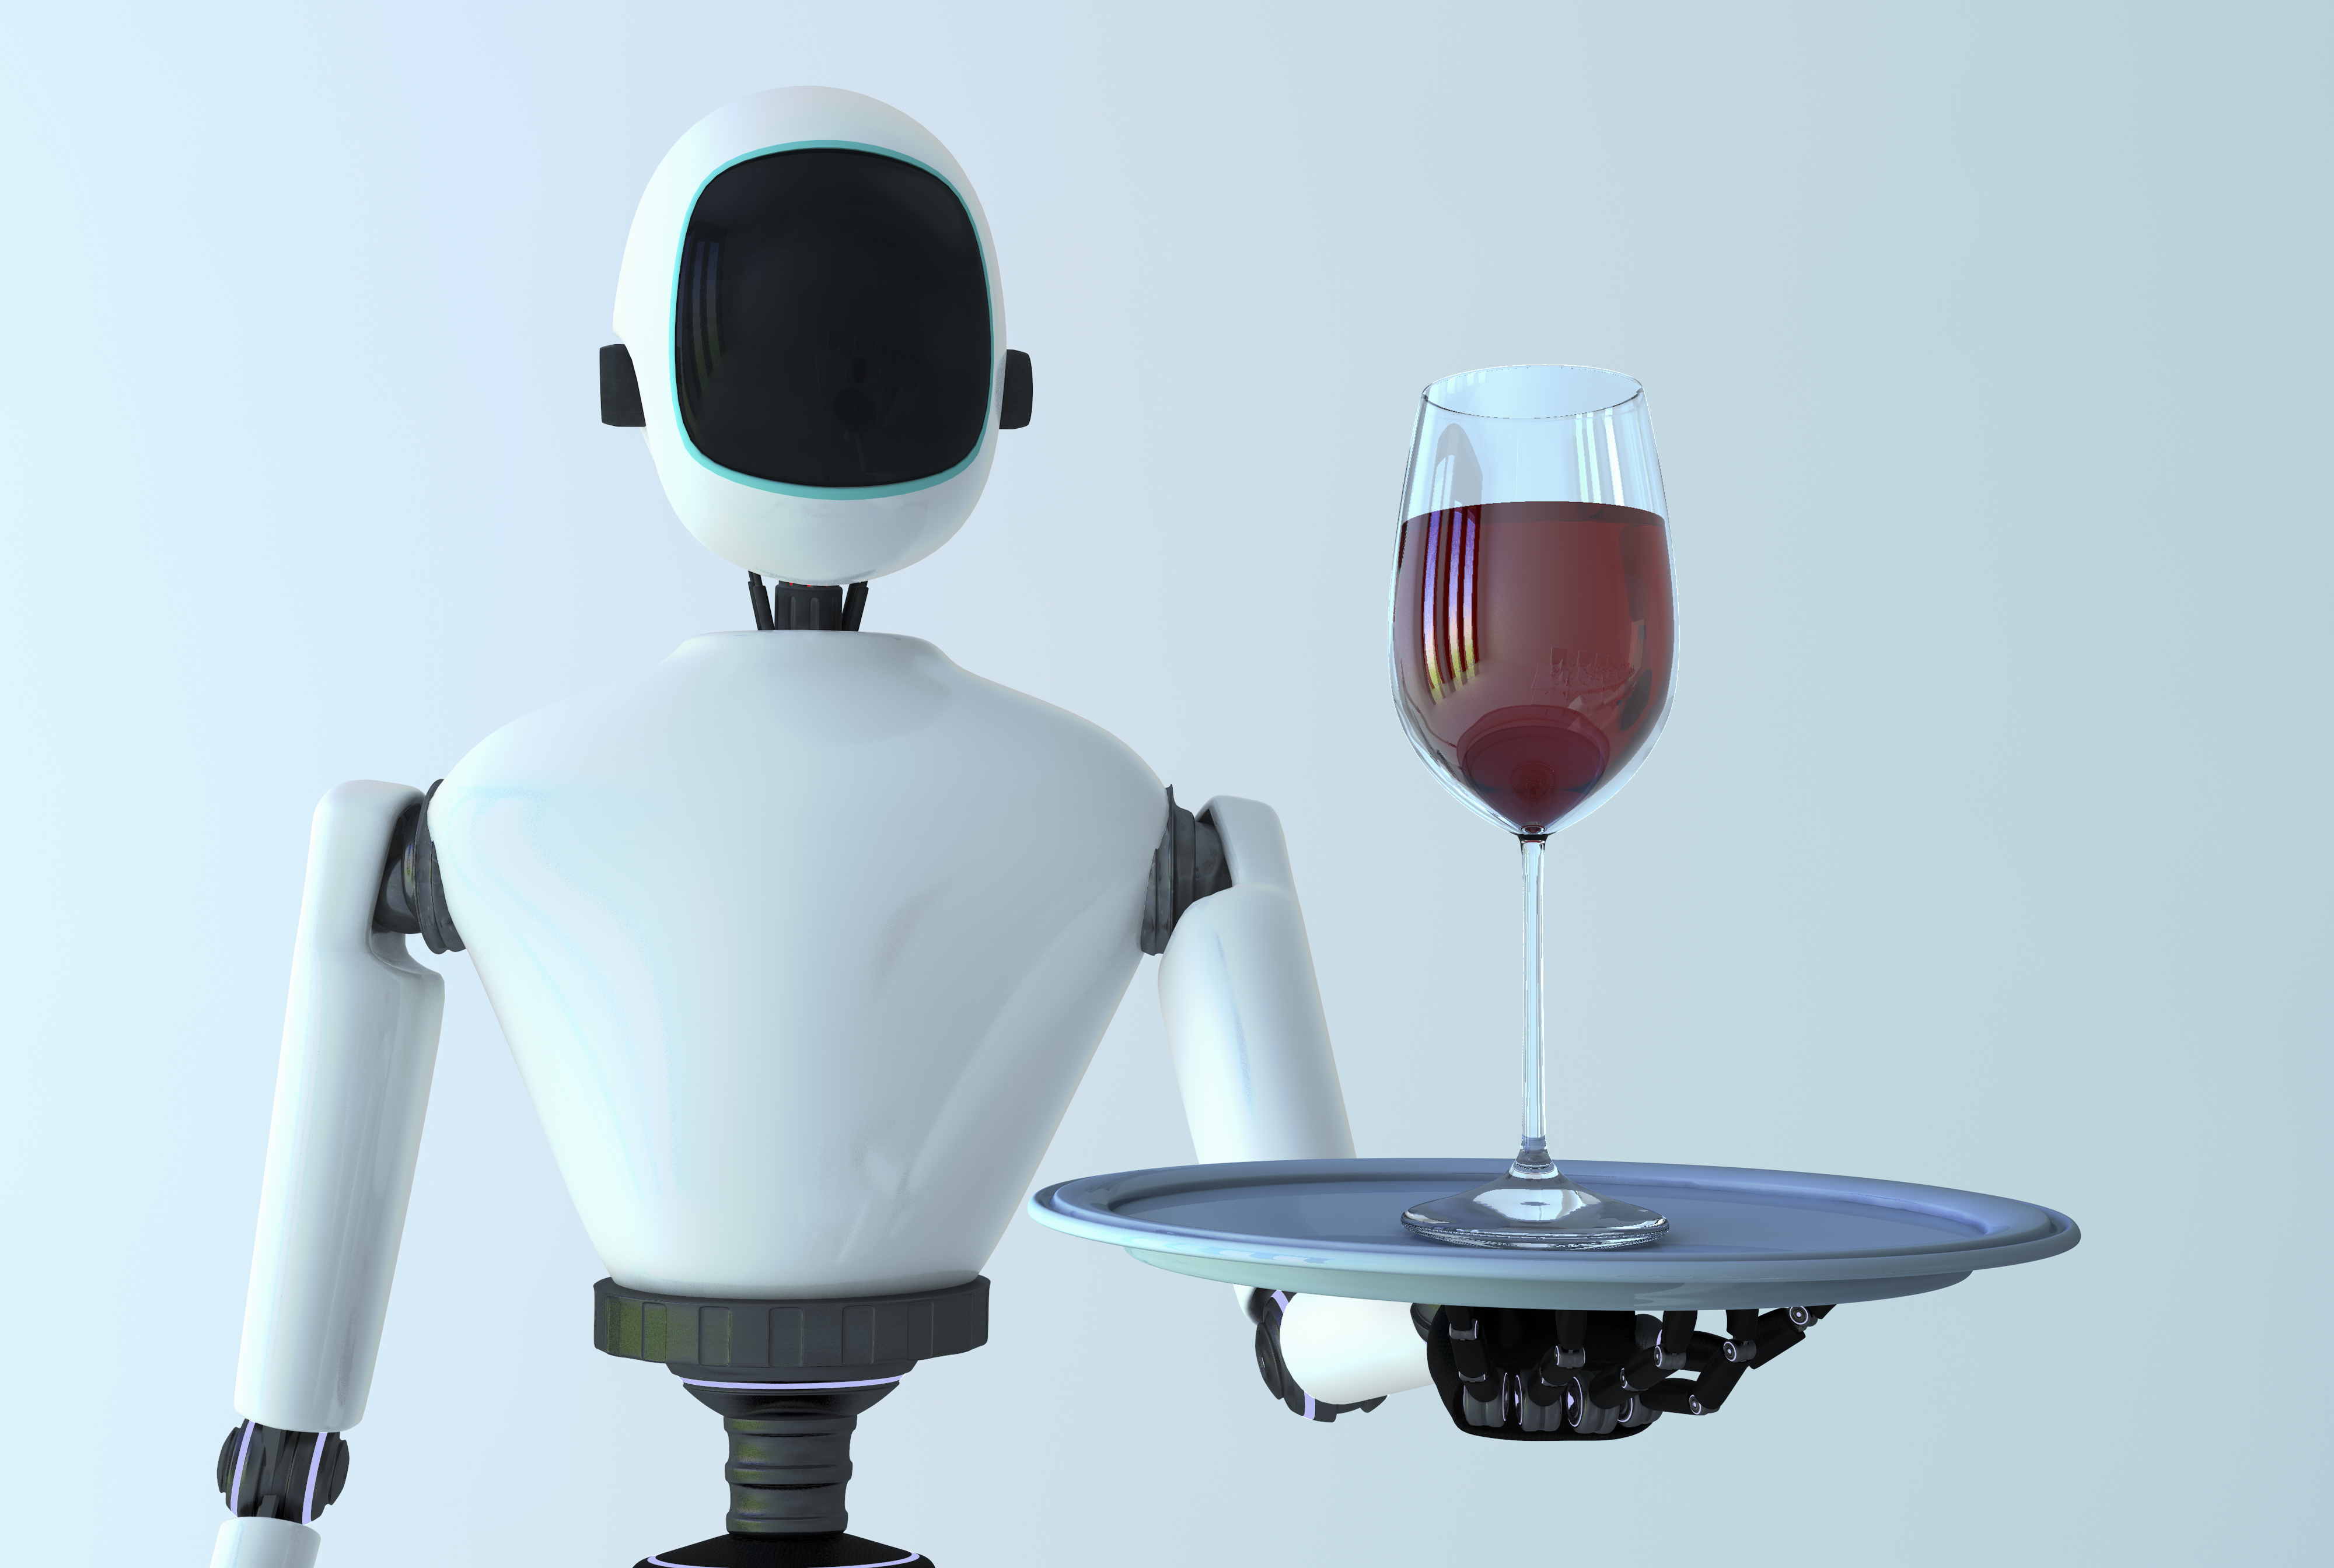 A service robot serving wine in a dining room